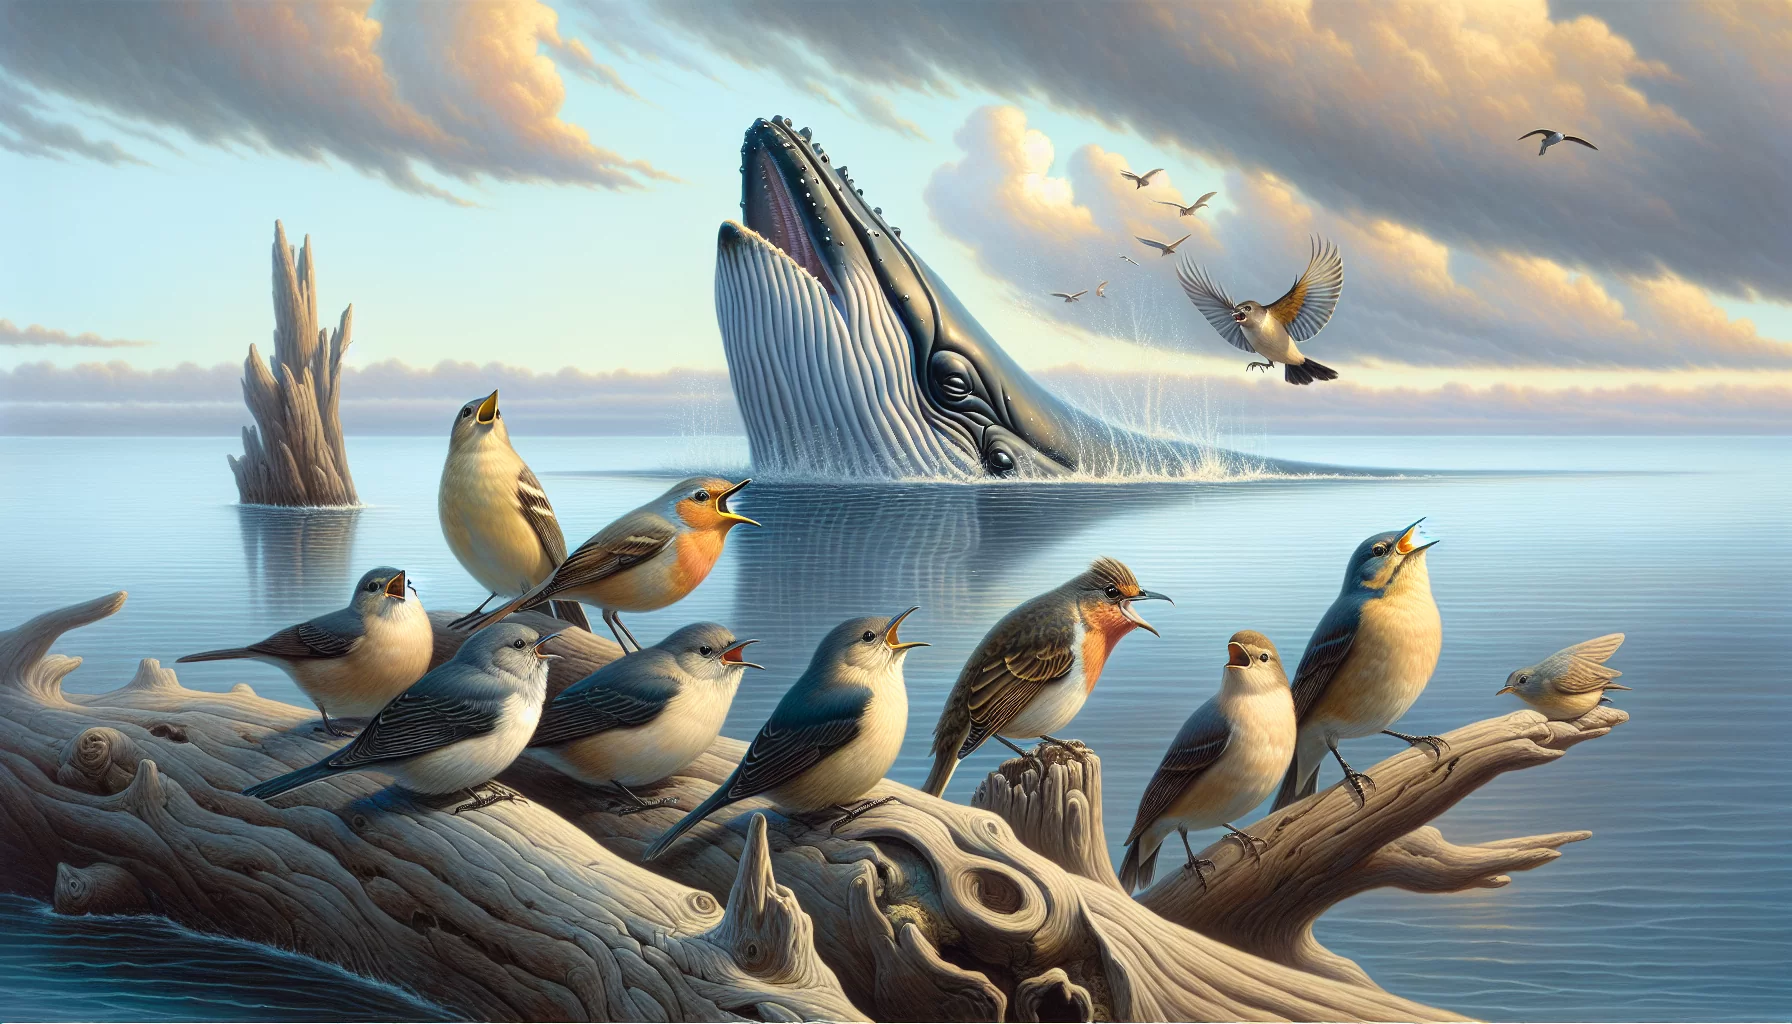 Exploring the intricate communication of songbirds and whale songs